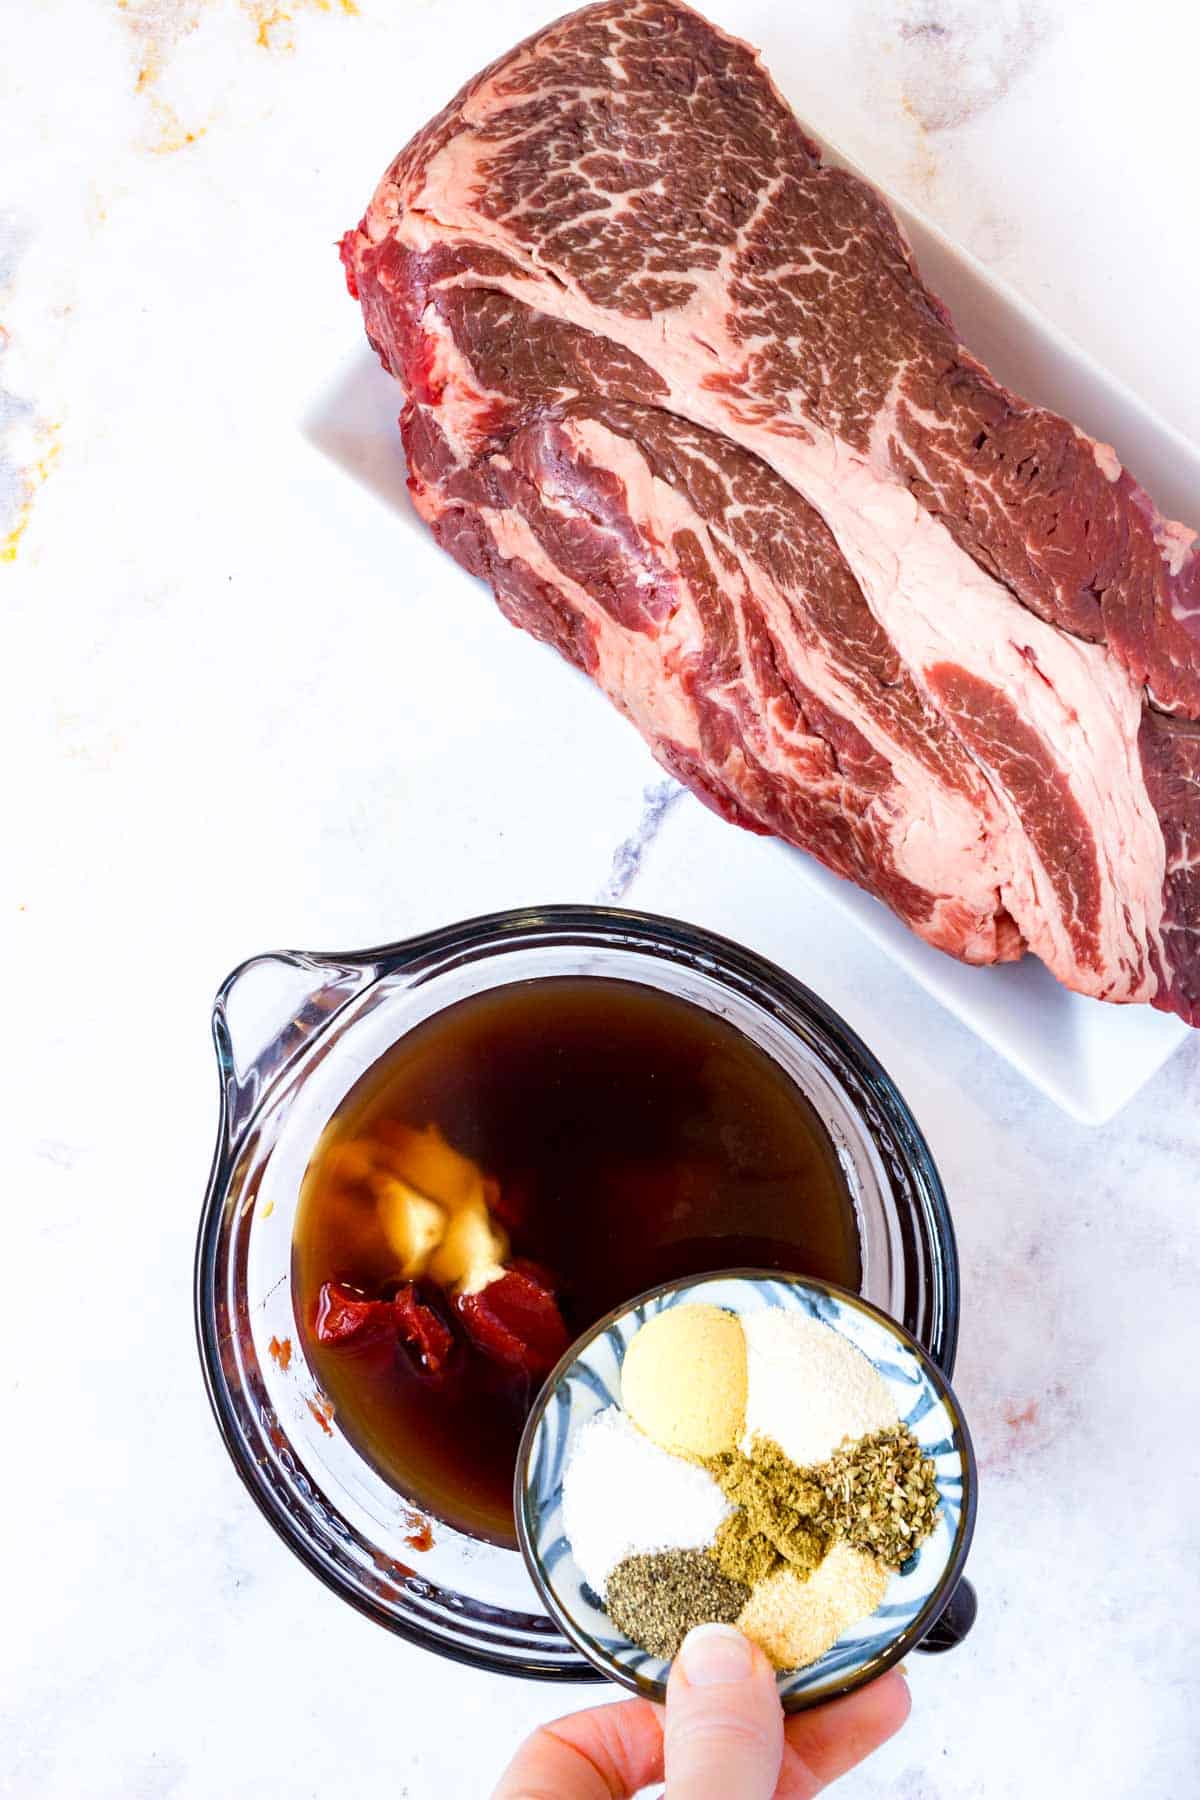 BBQ sauce ingredients are added into a glass mixing bowl next to an uncooked beef chuck roast.